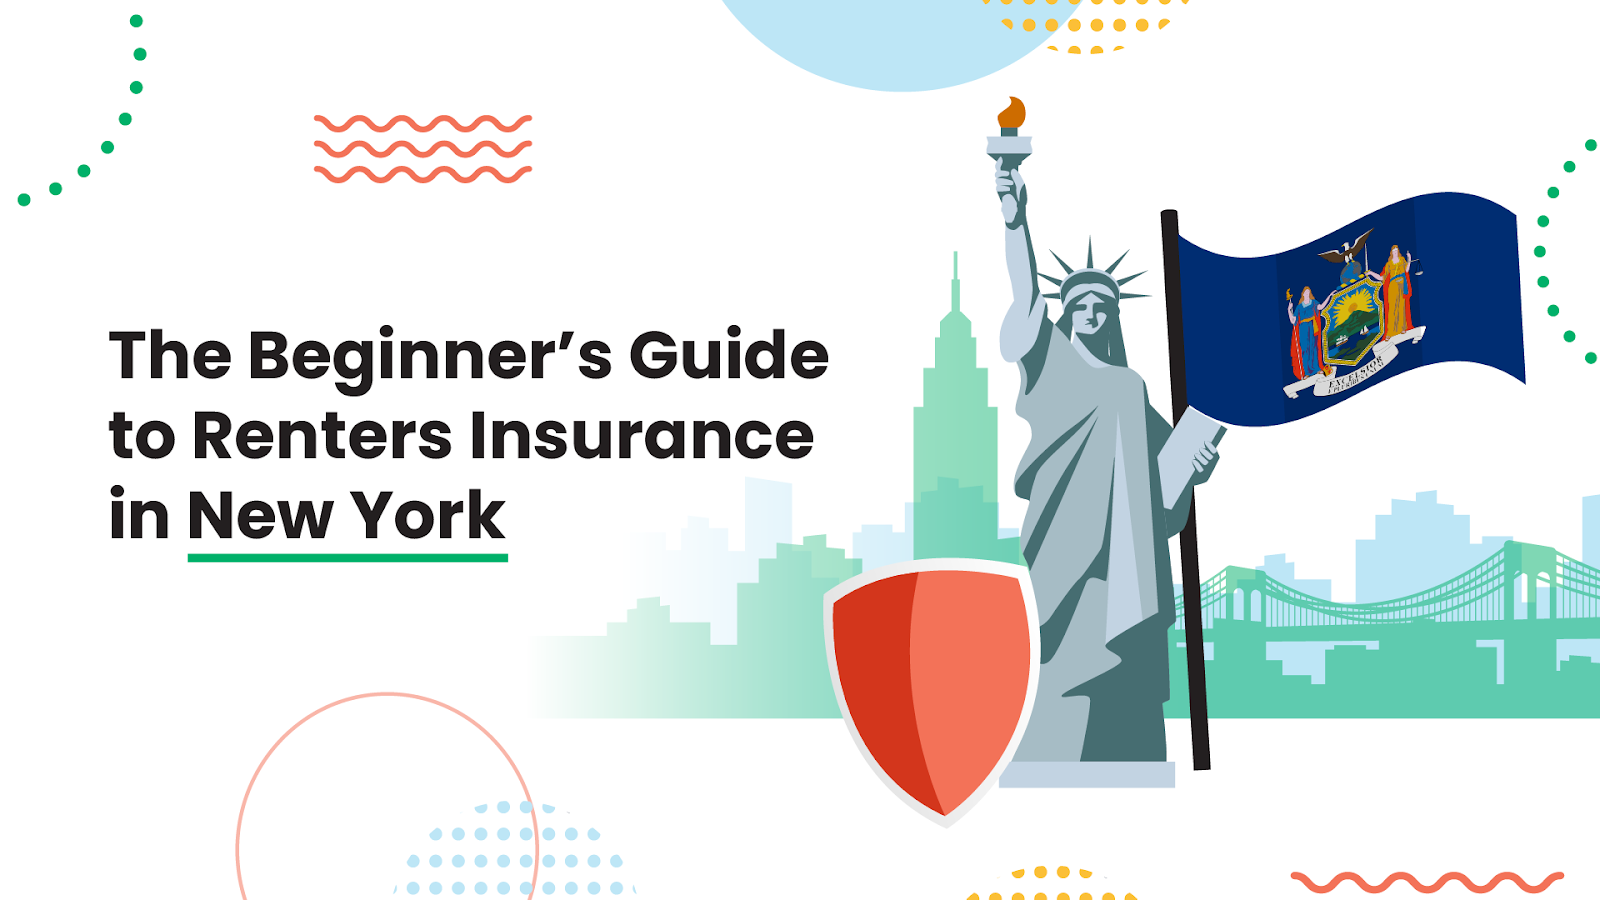 The Beginner’s Guide to Renters Insurance in New York